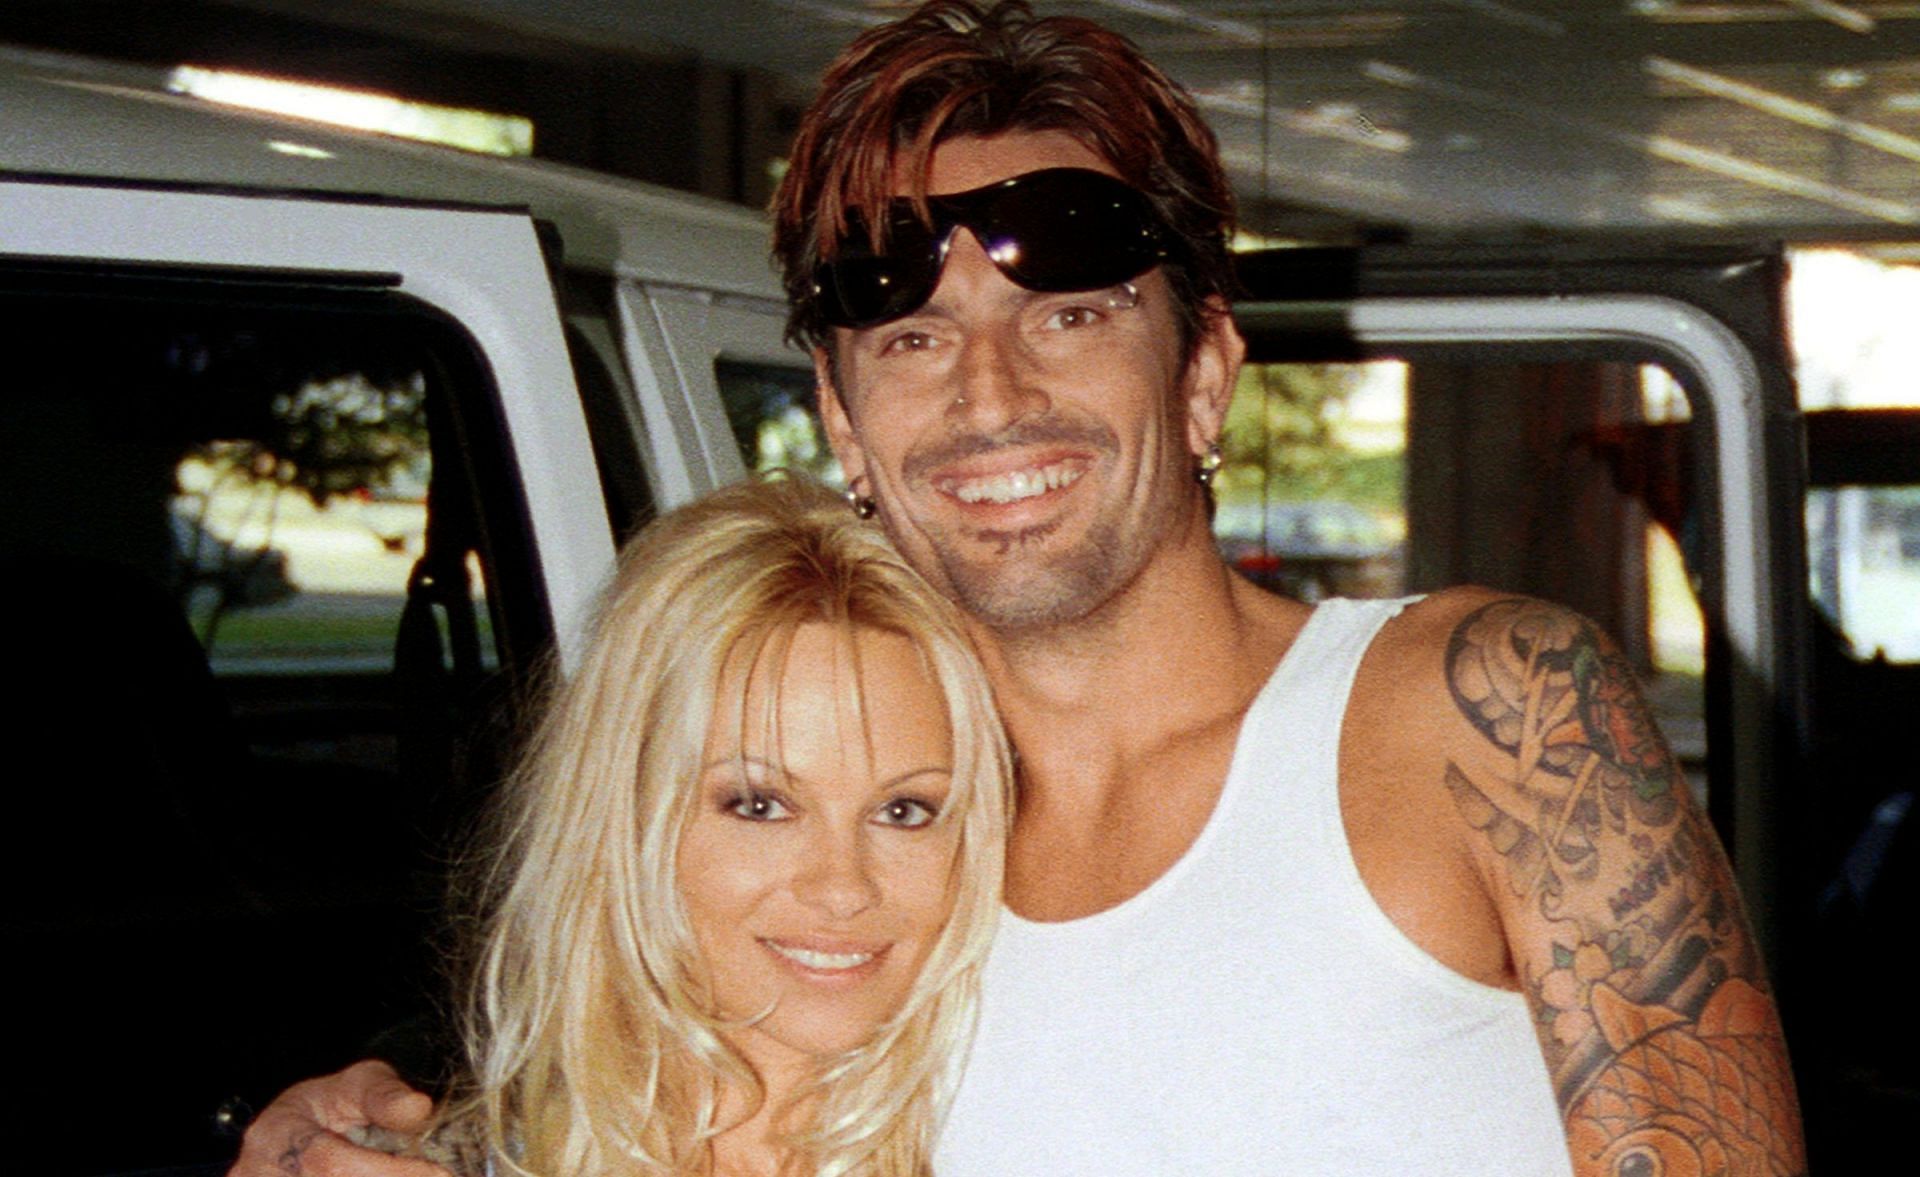 Pamela Anderson and Tommy Lee tied the knot just after four days of dating (Image via Getty Images)